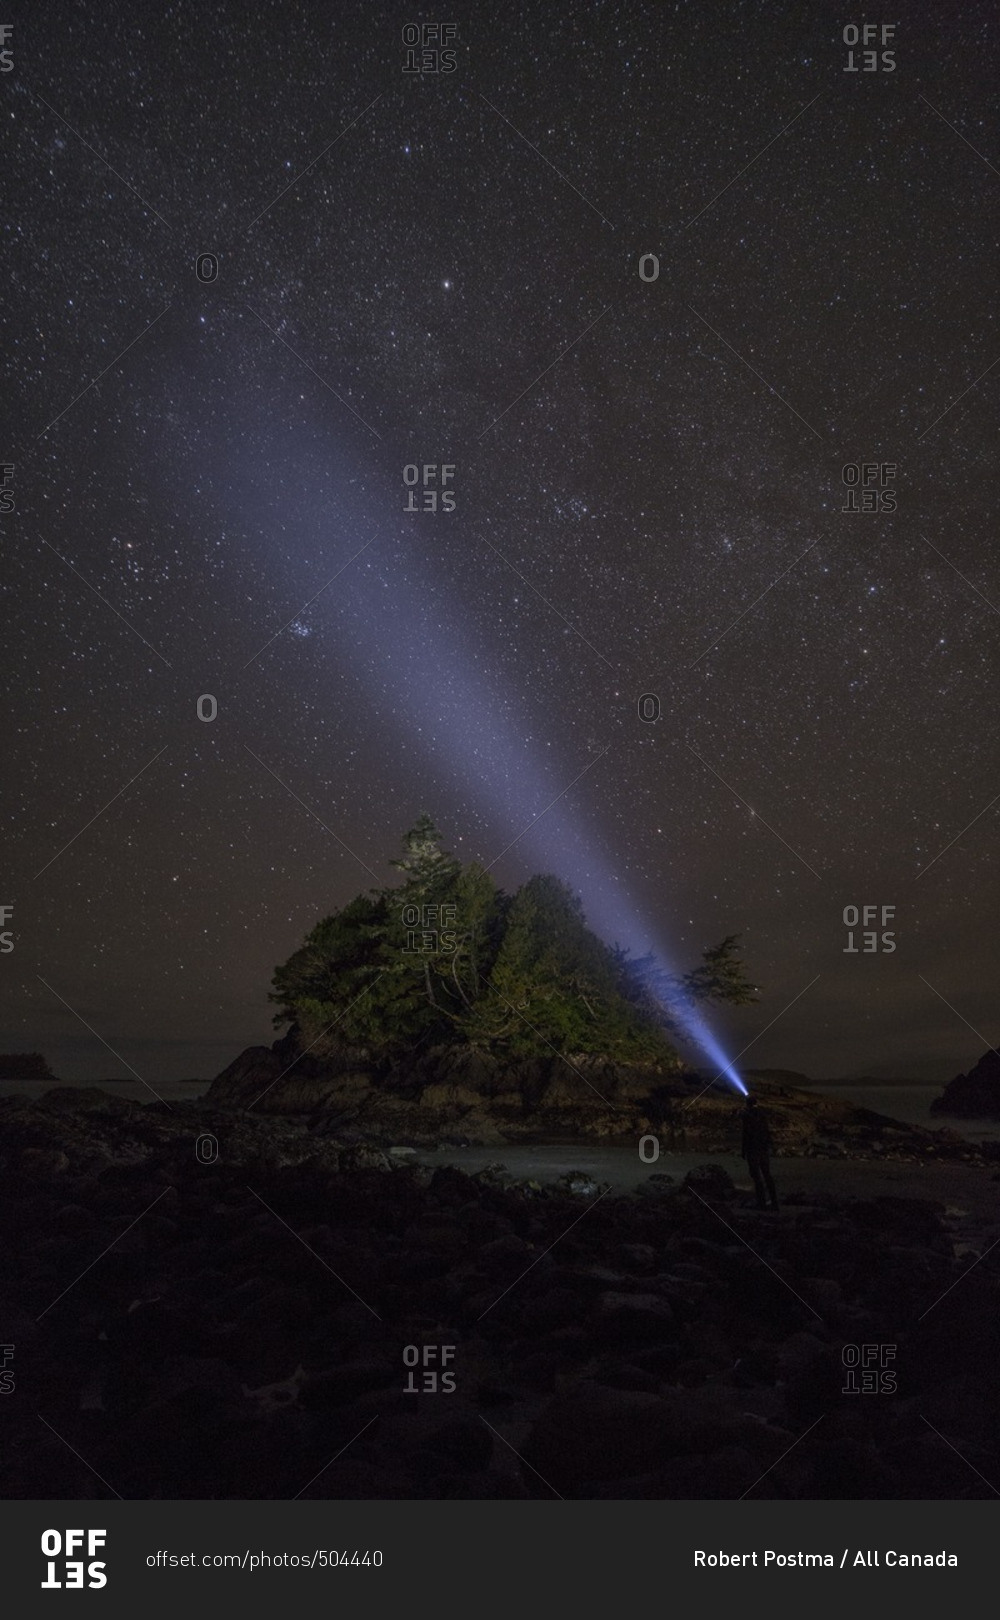 Man stands on the shore of the Pacific Ocean shining his headlamp into the night sky, Tofino, British Columbia, Canada, the Milky Way can be seen in the night sky